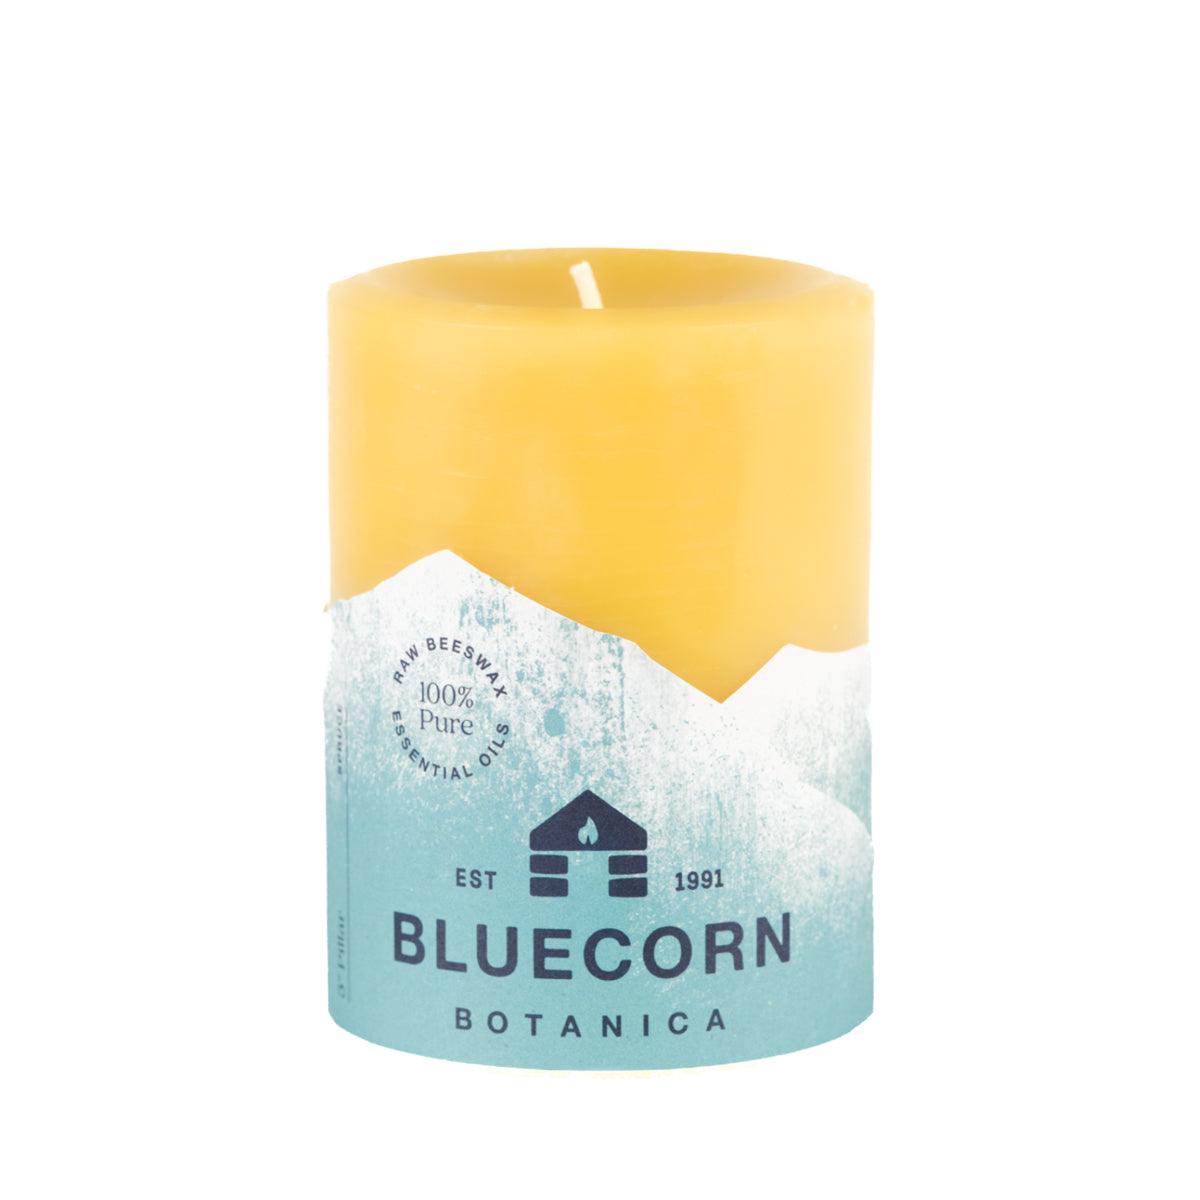 Bluecorn Botanica 100% Pure Beeswax Spruce 3" x 4"  Scented Pillar Candle. Burn Time: 60 hours. Made with 100% Pure Beeswax, 100% Pure Essential Oils, and a 100% pure cotton wick, no lead. Candles are paraffin free, clean burning and non-toxic. Features Bluecorn Botanica label in Forest Green printed on 100% recycled paper. Wax is golden in color. 